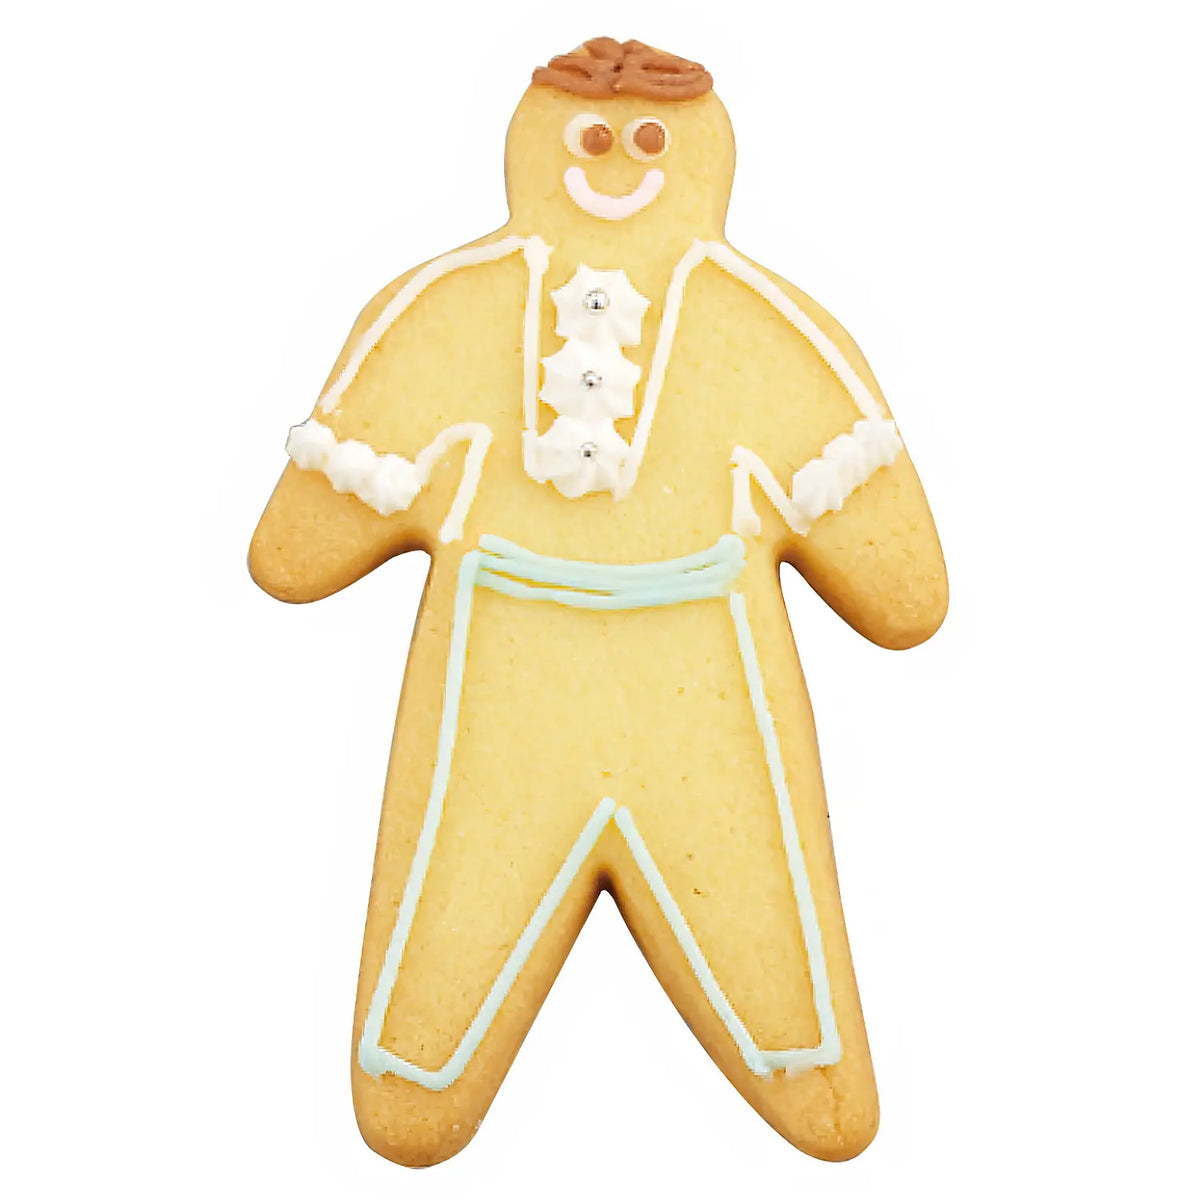 TIGERCROWN Cake Land Stainless Steel Cookie Cutter Gingerbread Man